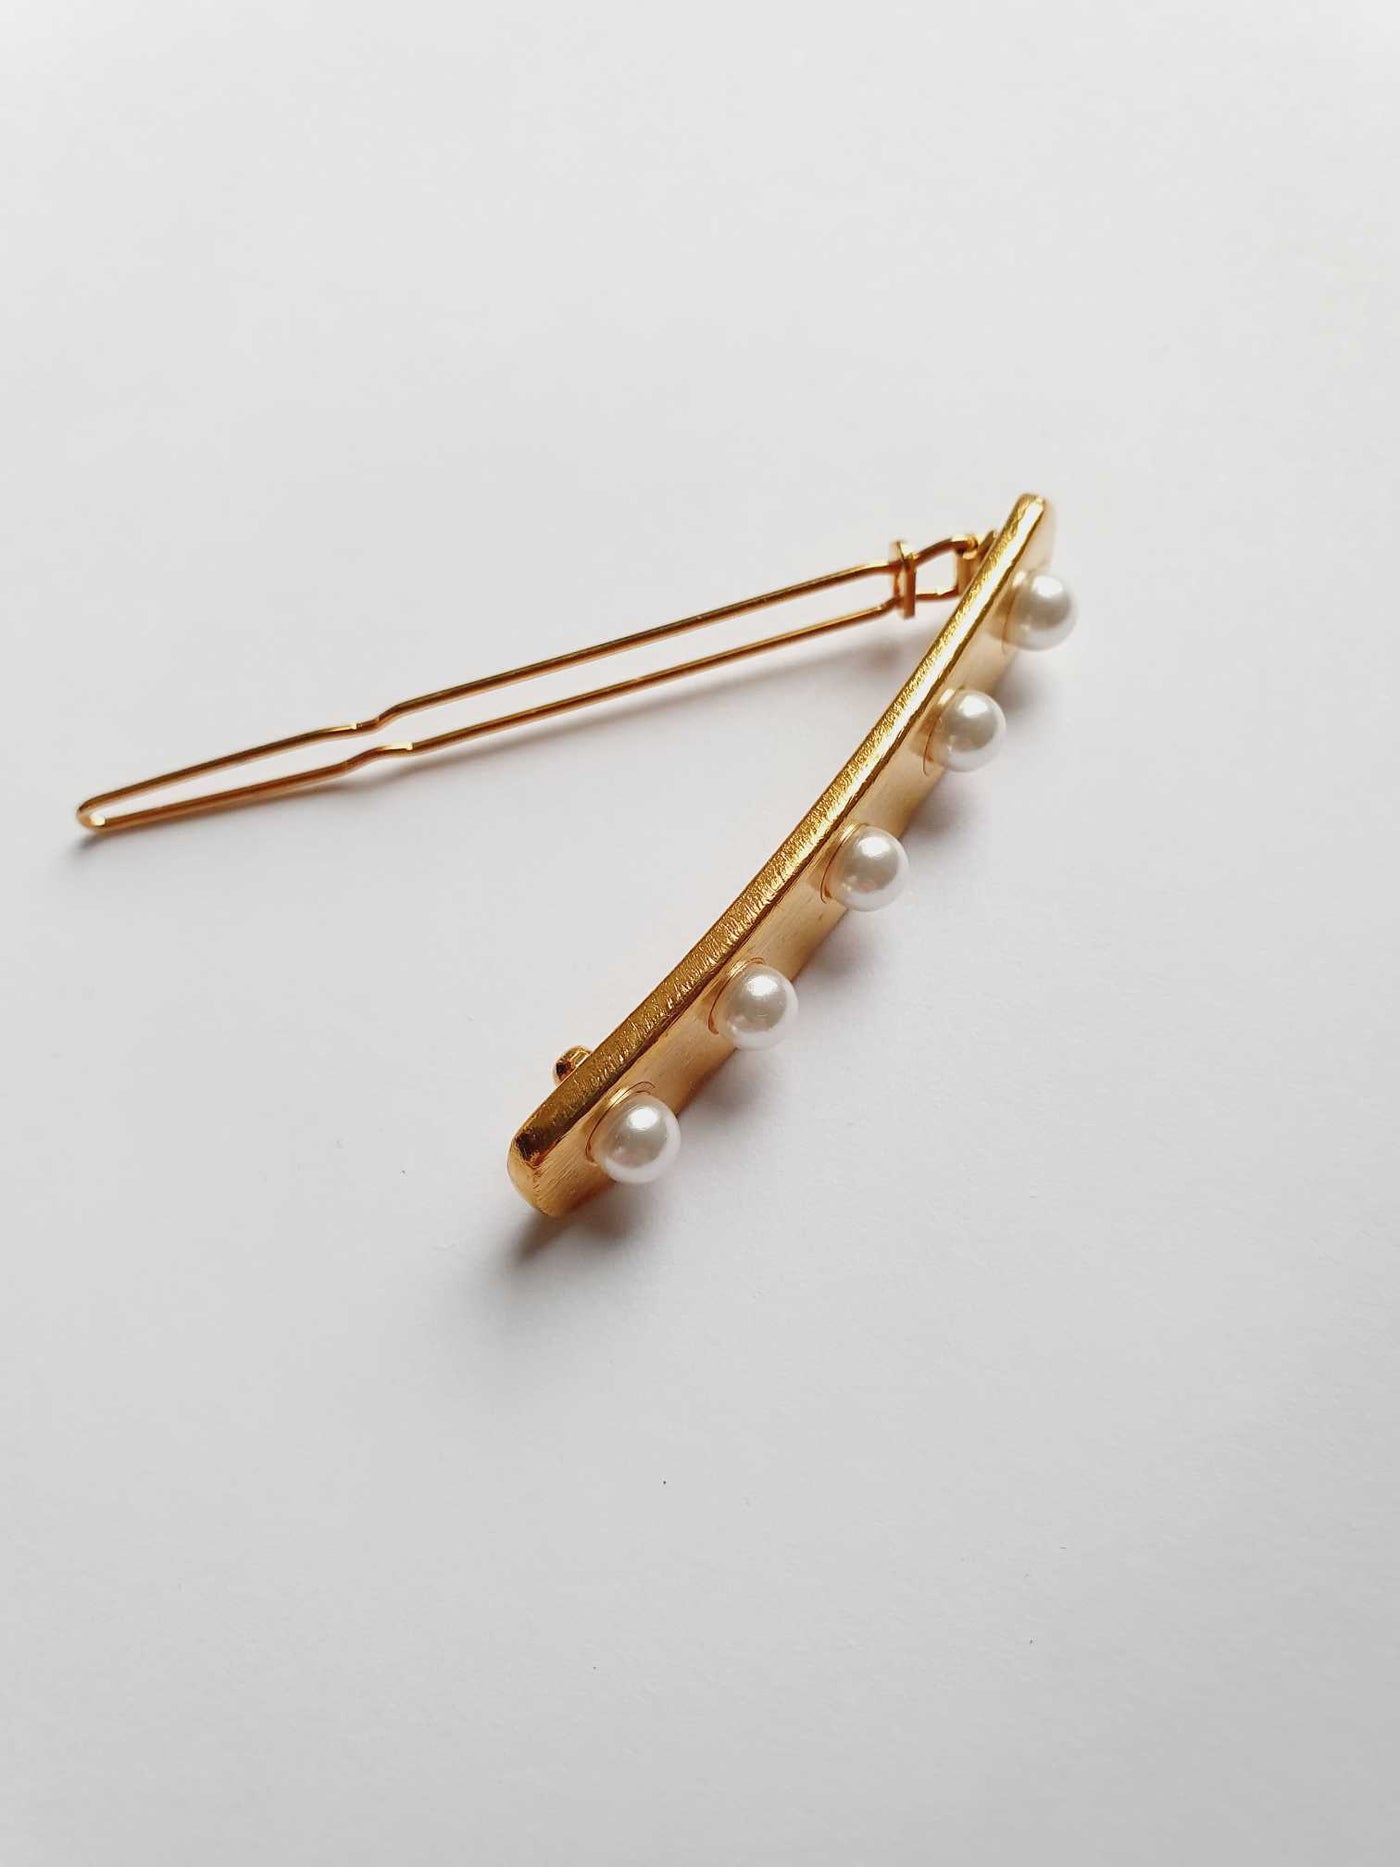 Vintage Gold Plated Hair Clip with Pearls